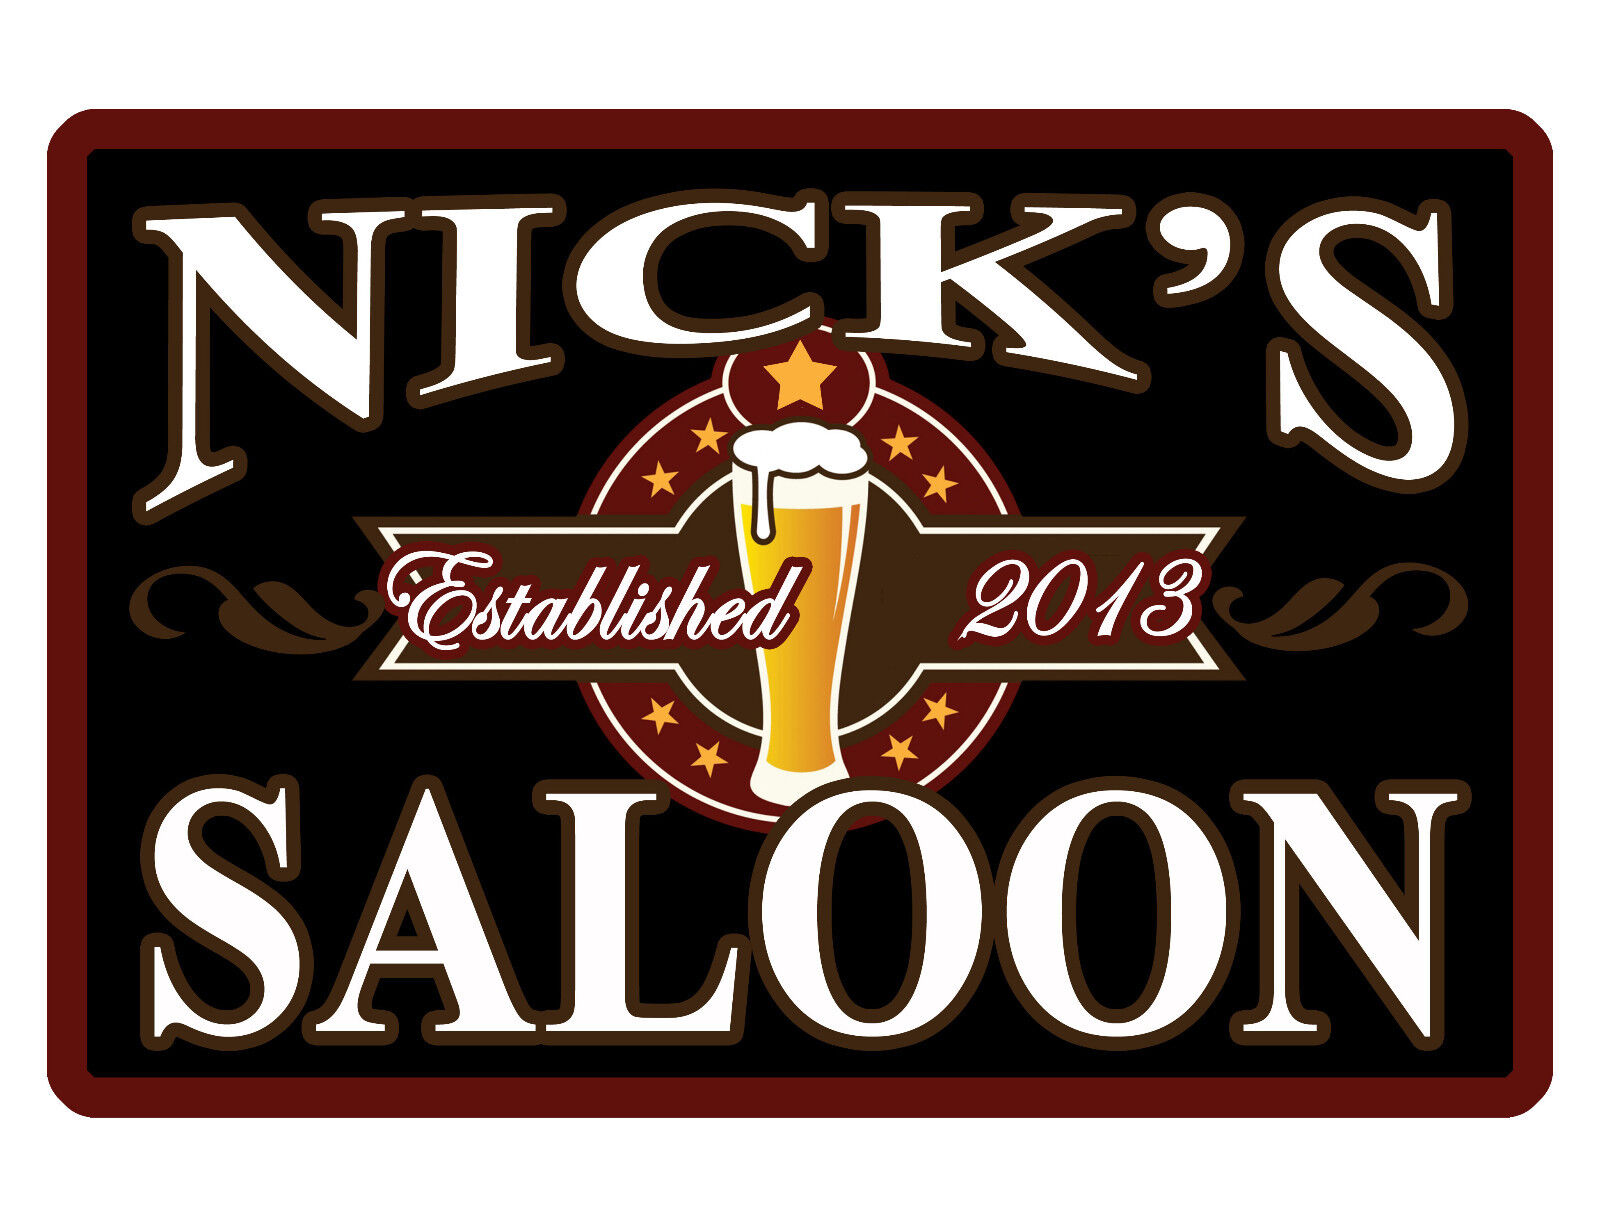 PERSONALIZED SALOON/BAR SIGN YOUR NAME DATE CUSTOM FULL COLOR ALUMINUM 12X18 353